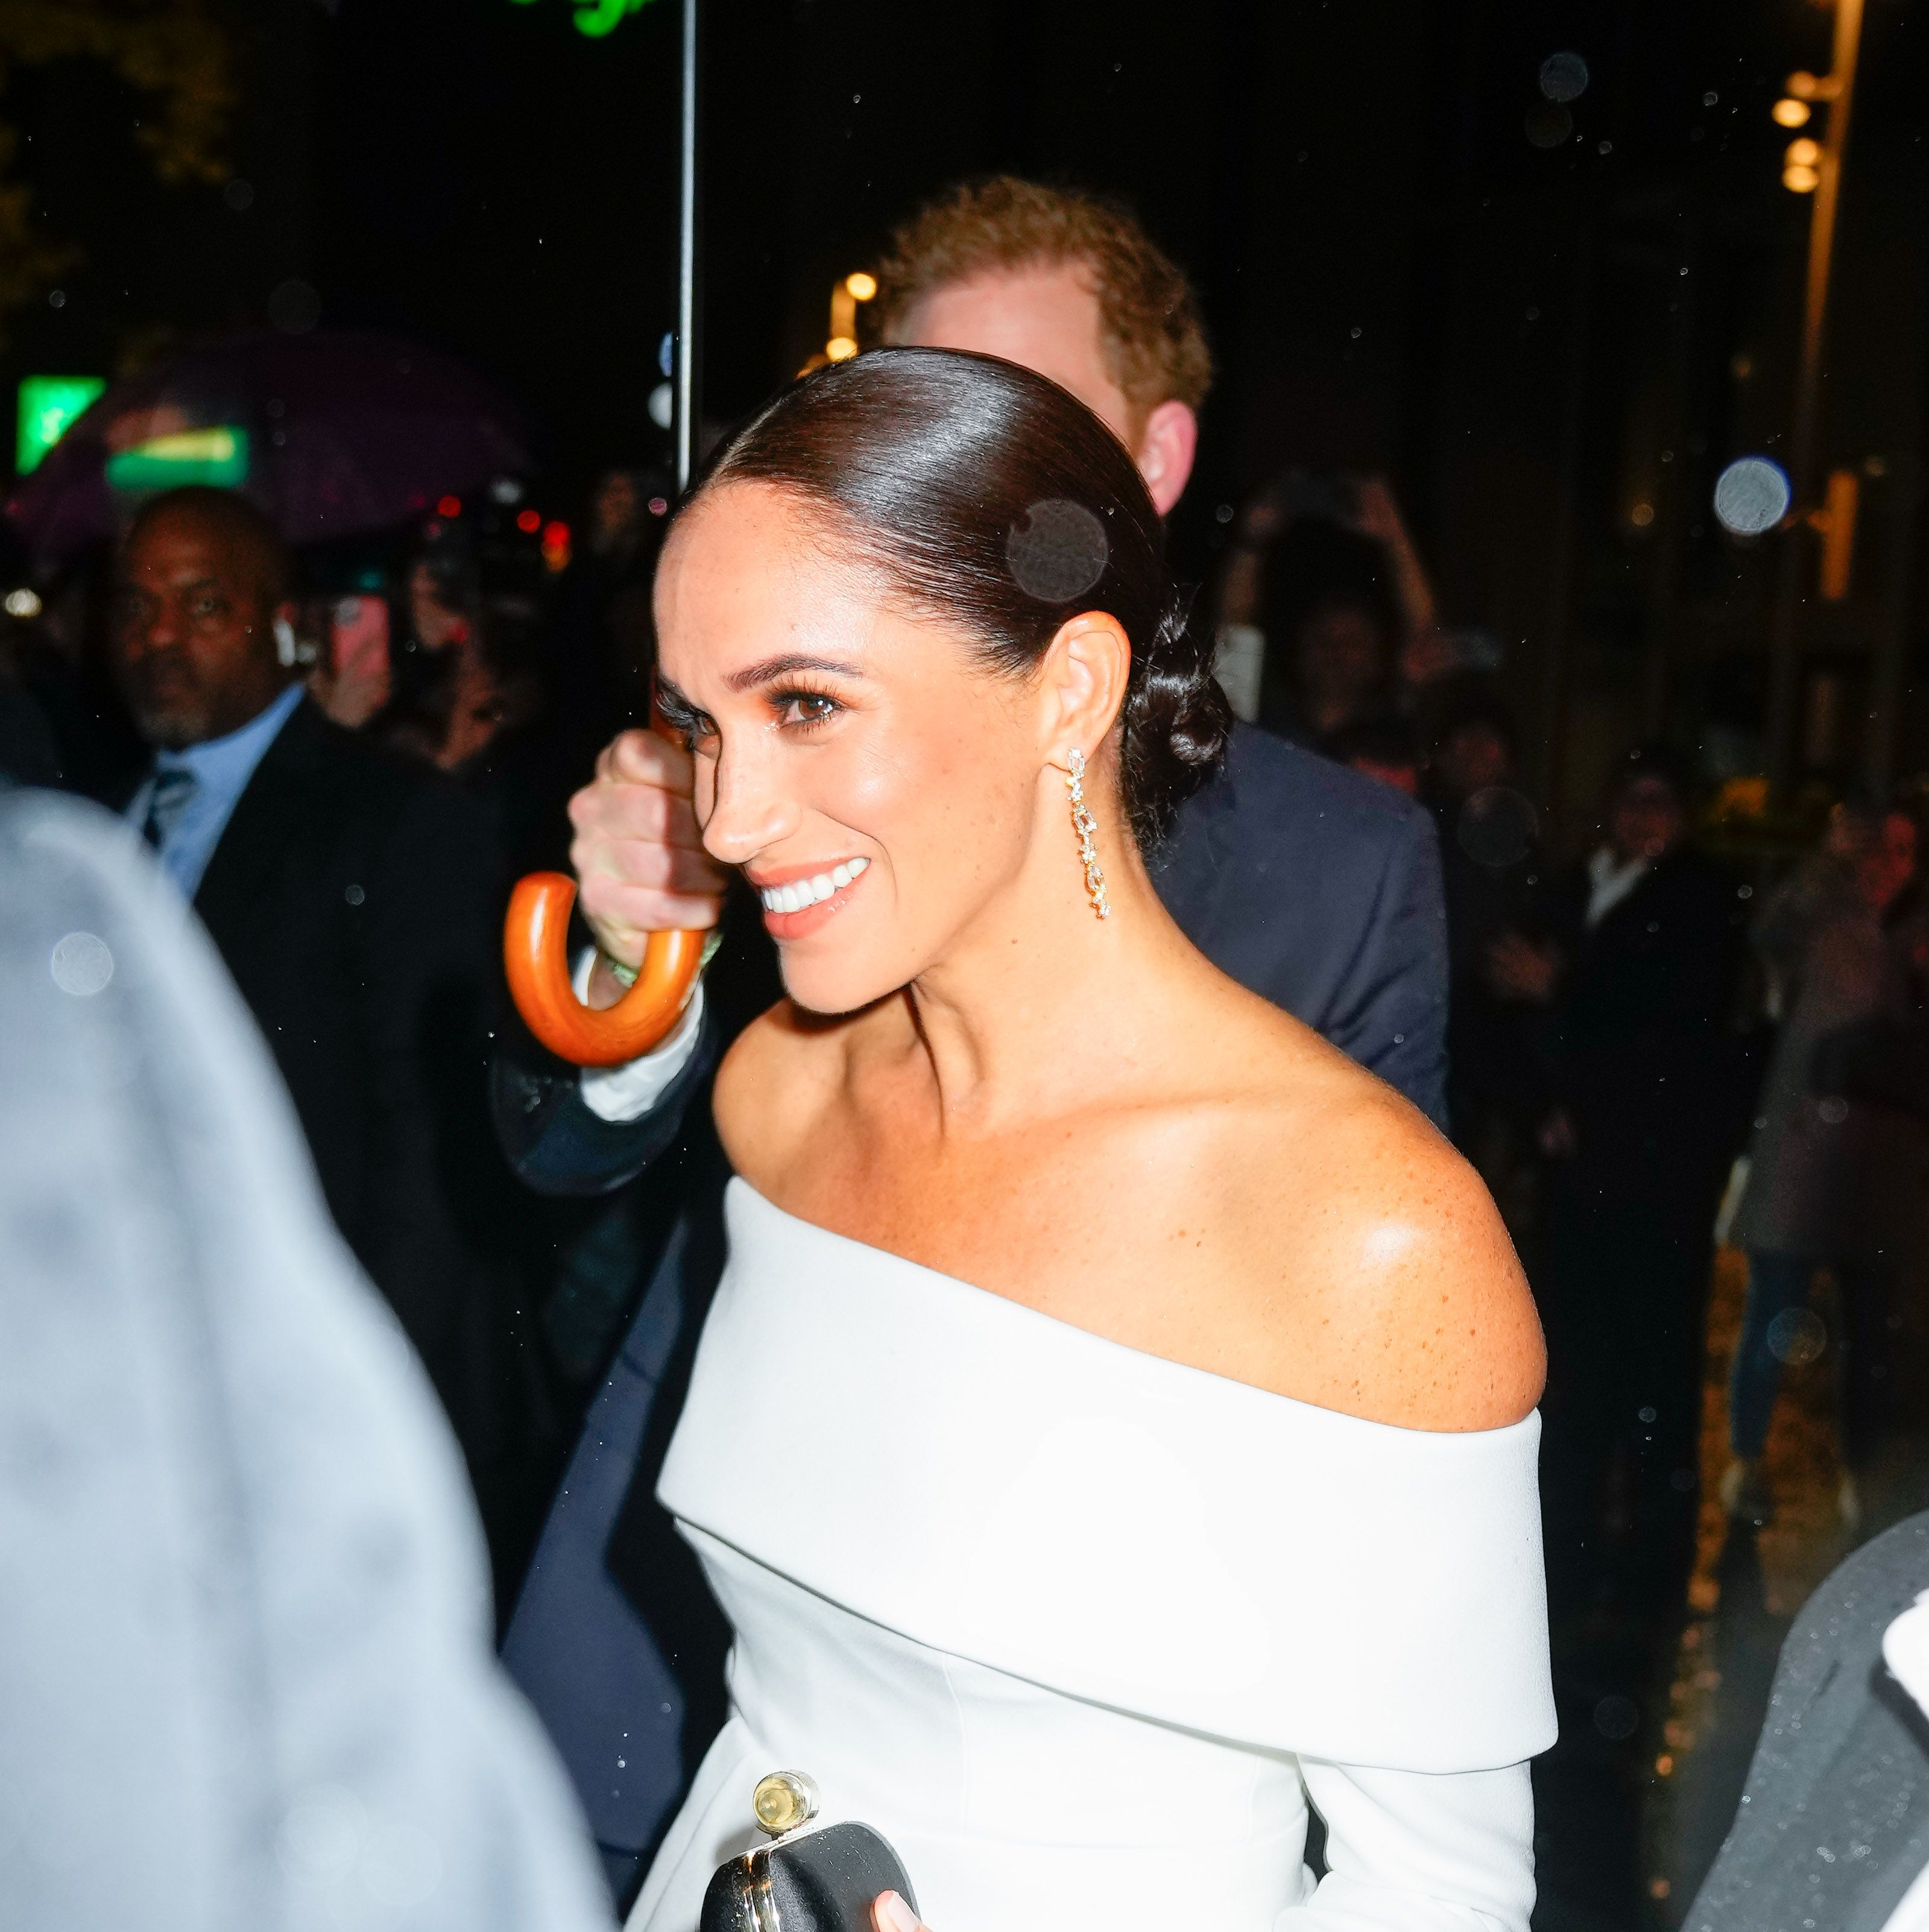 Why Meghan Markle Has Purposely Been 